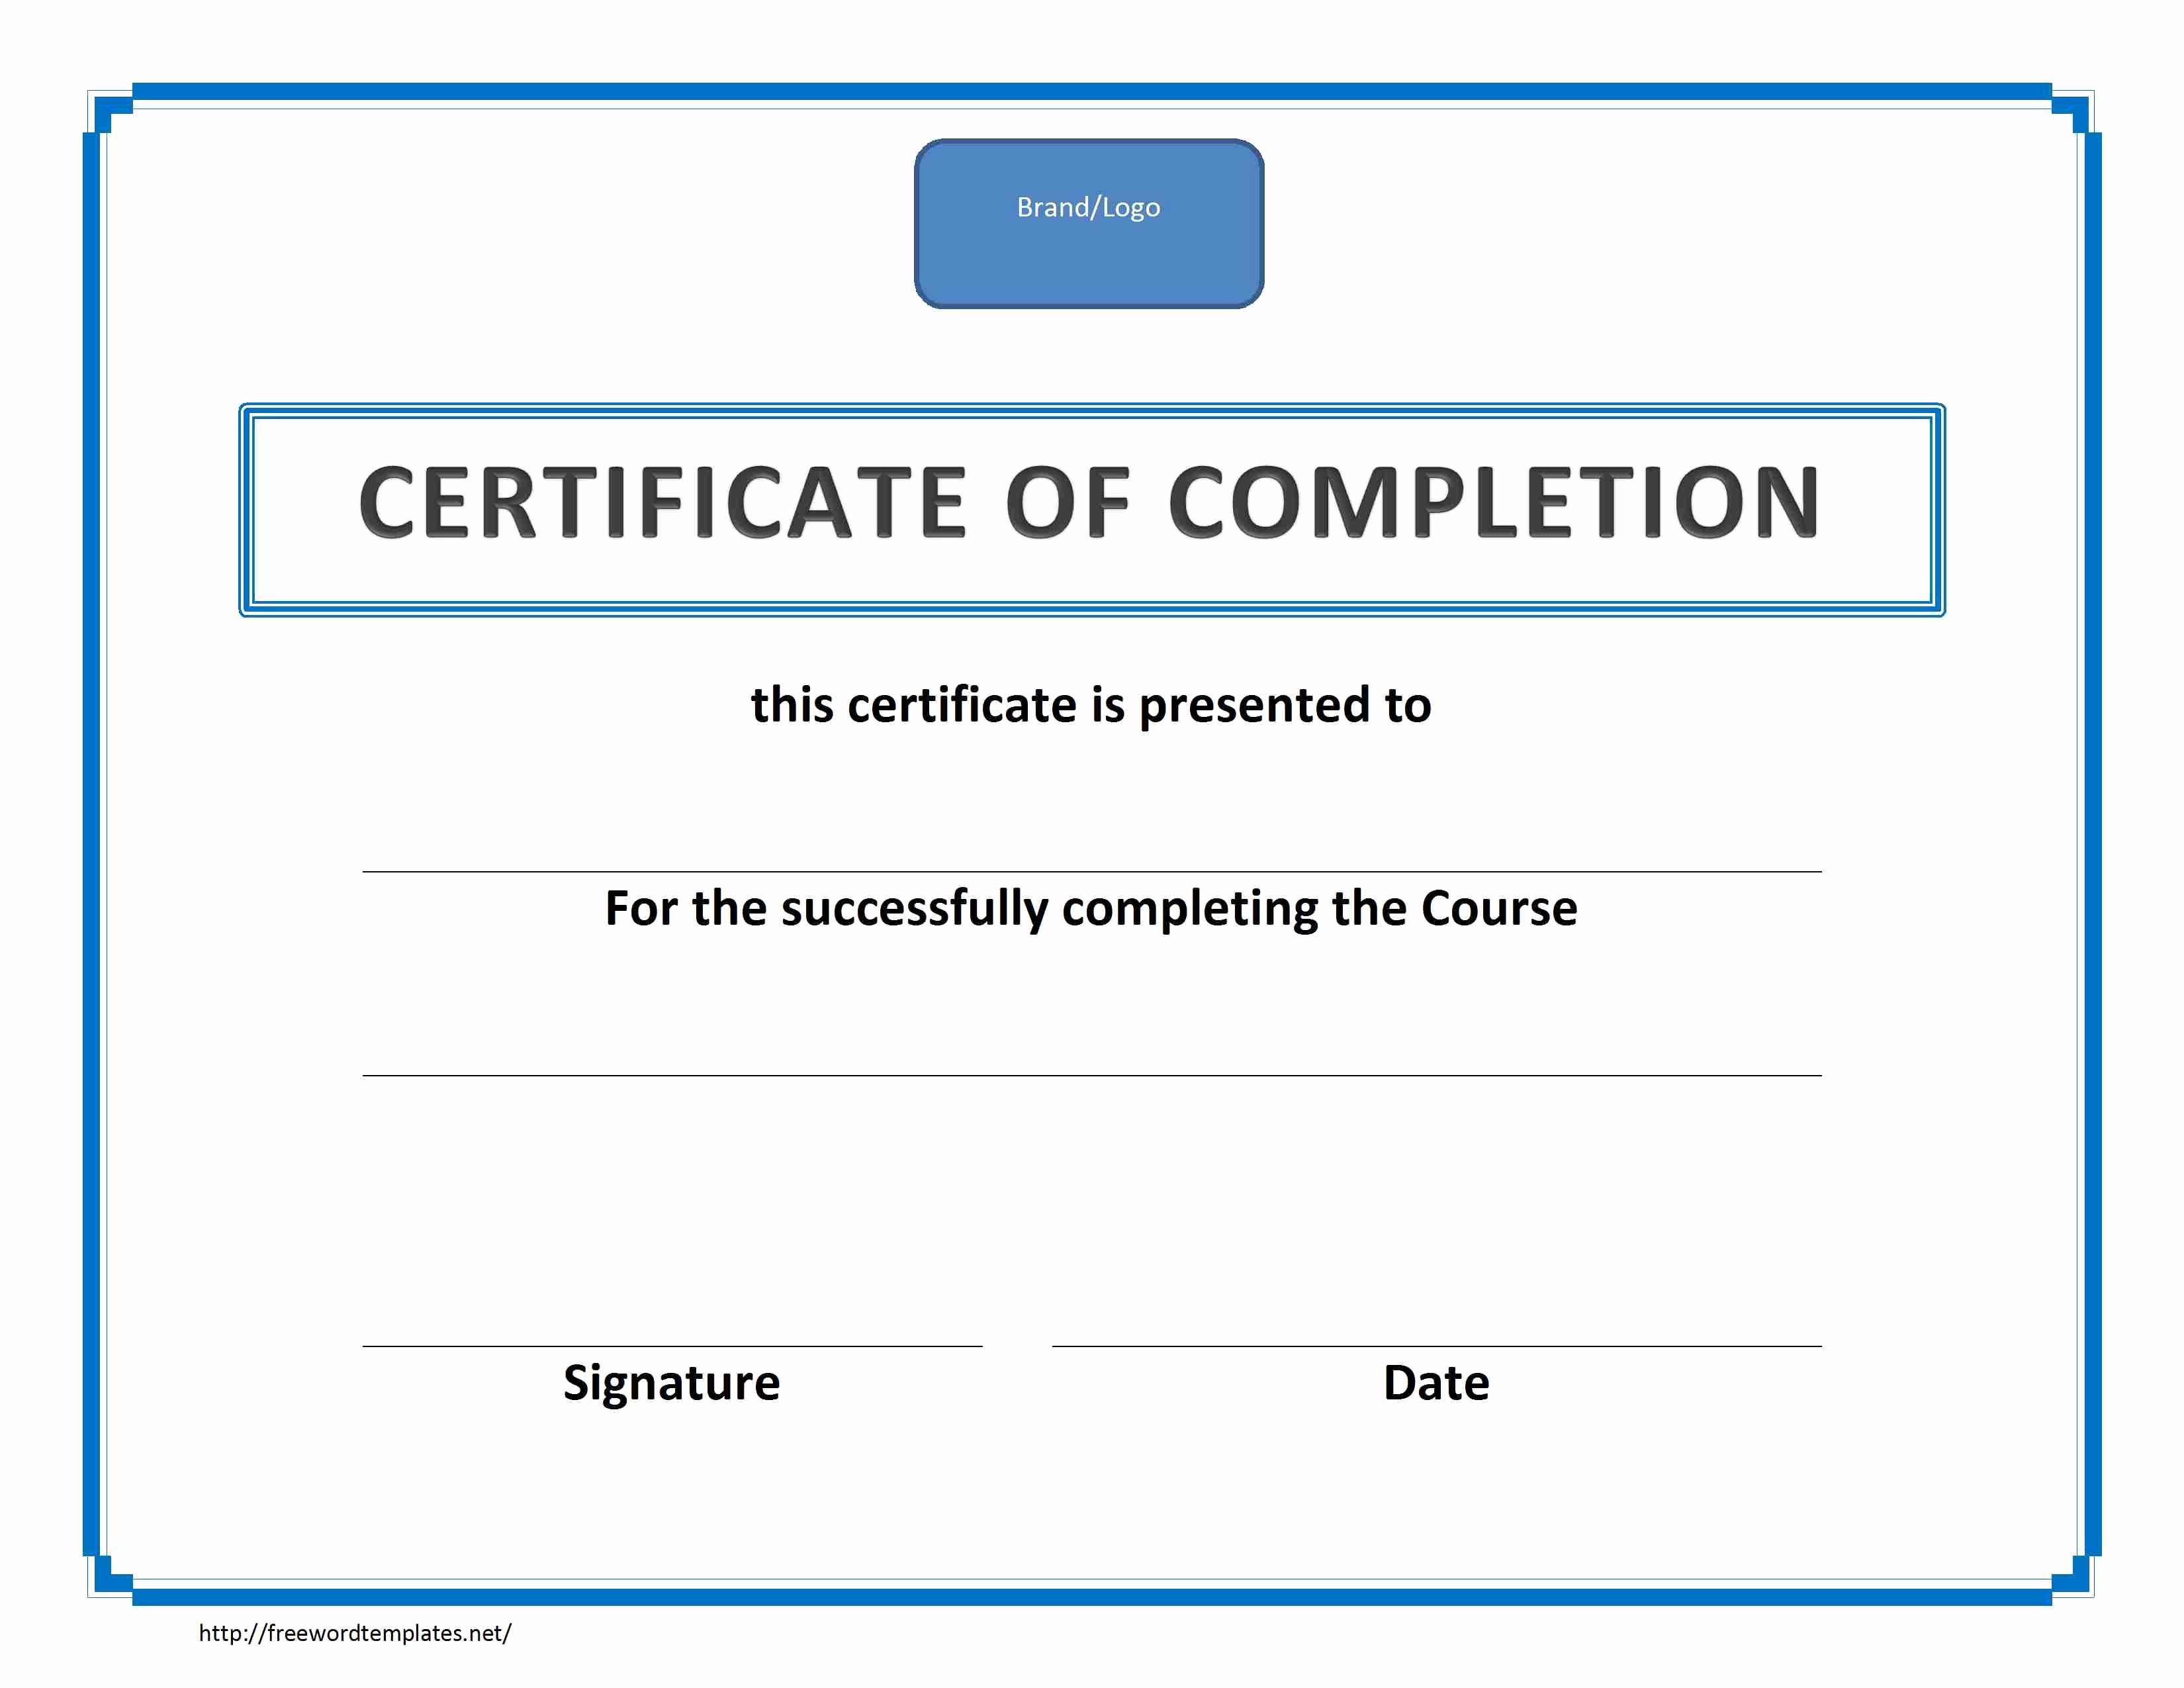 Training Certificate Template Free Unique as An Employee or College Student It is Mon to Receive